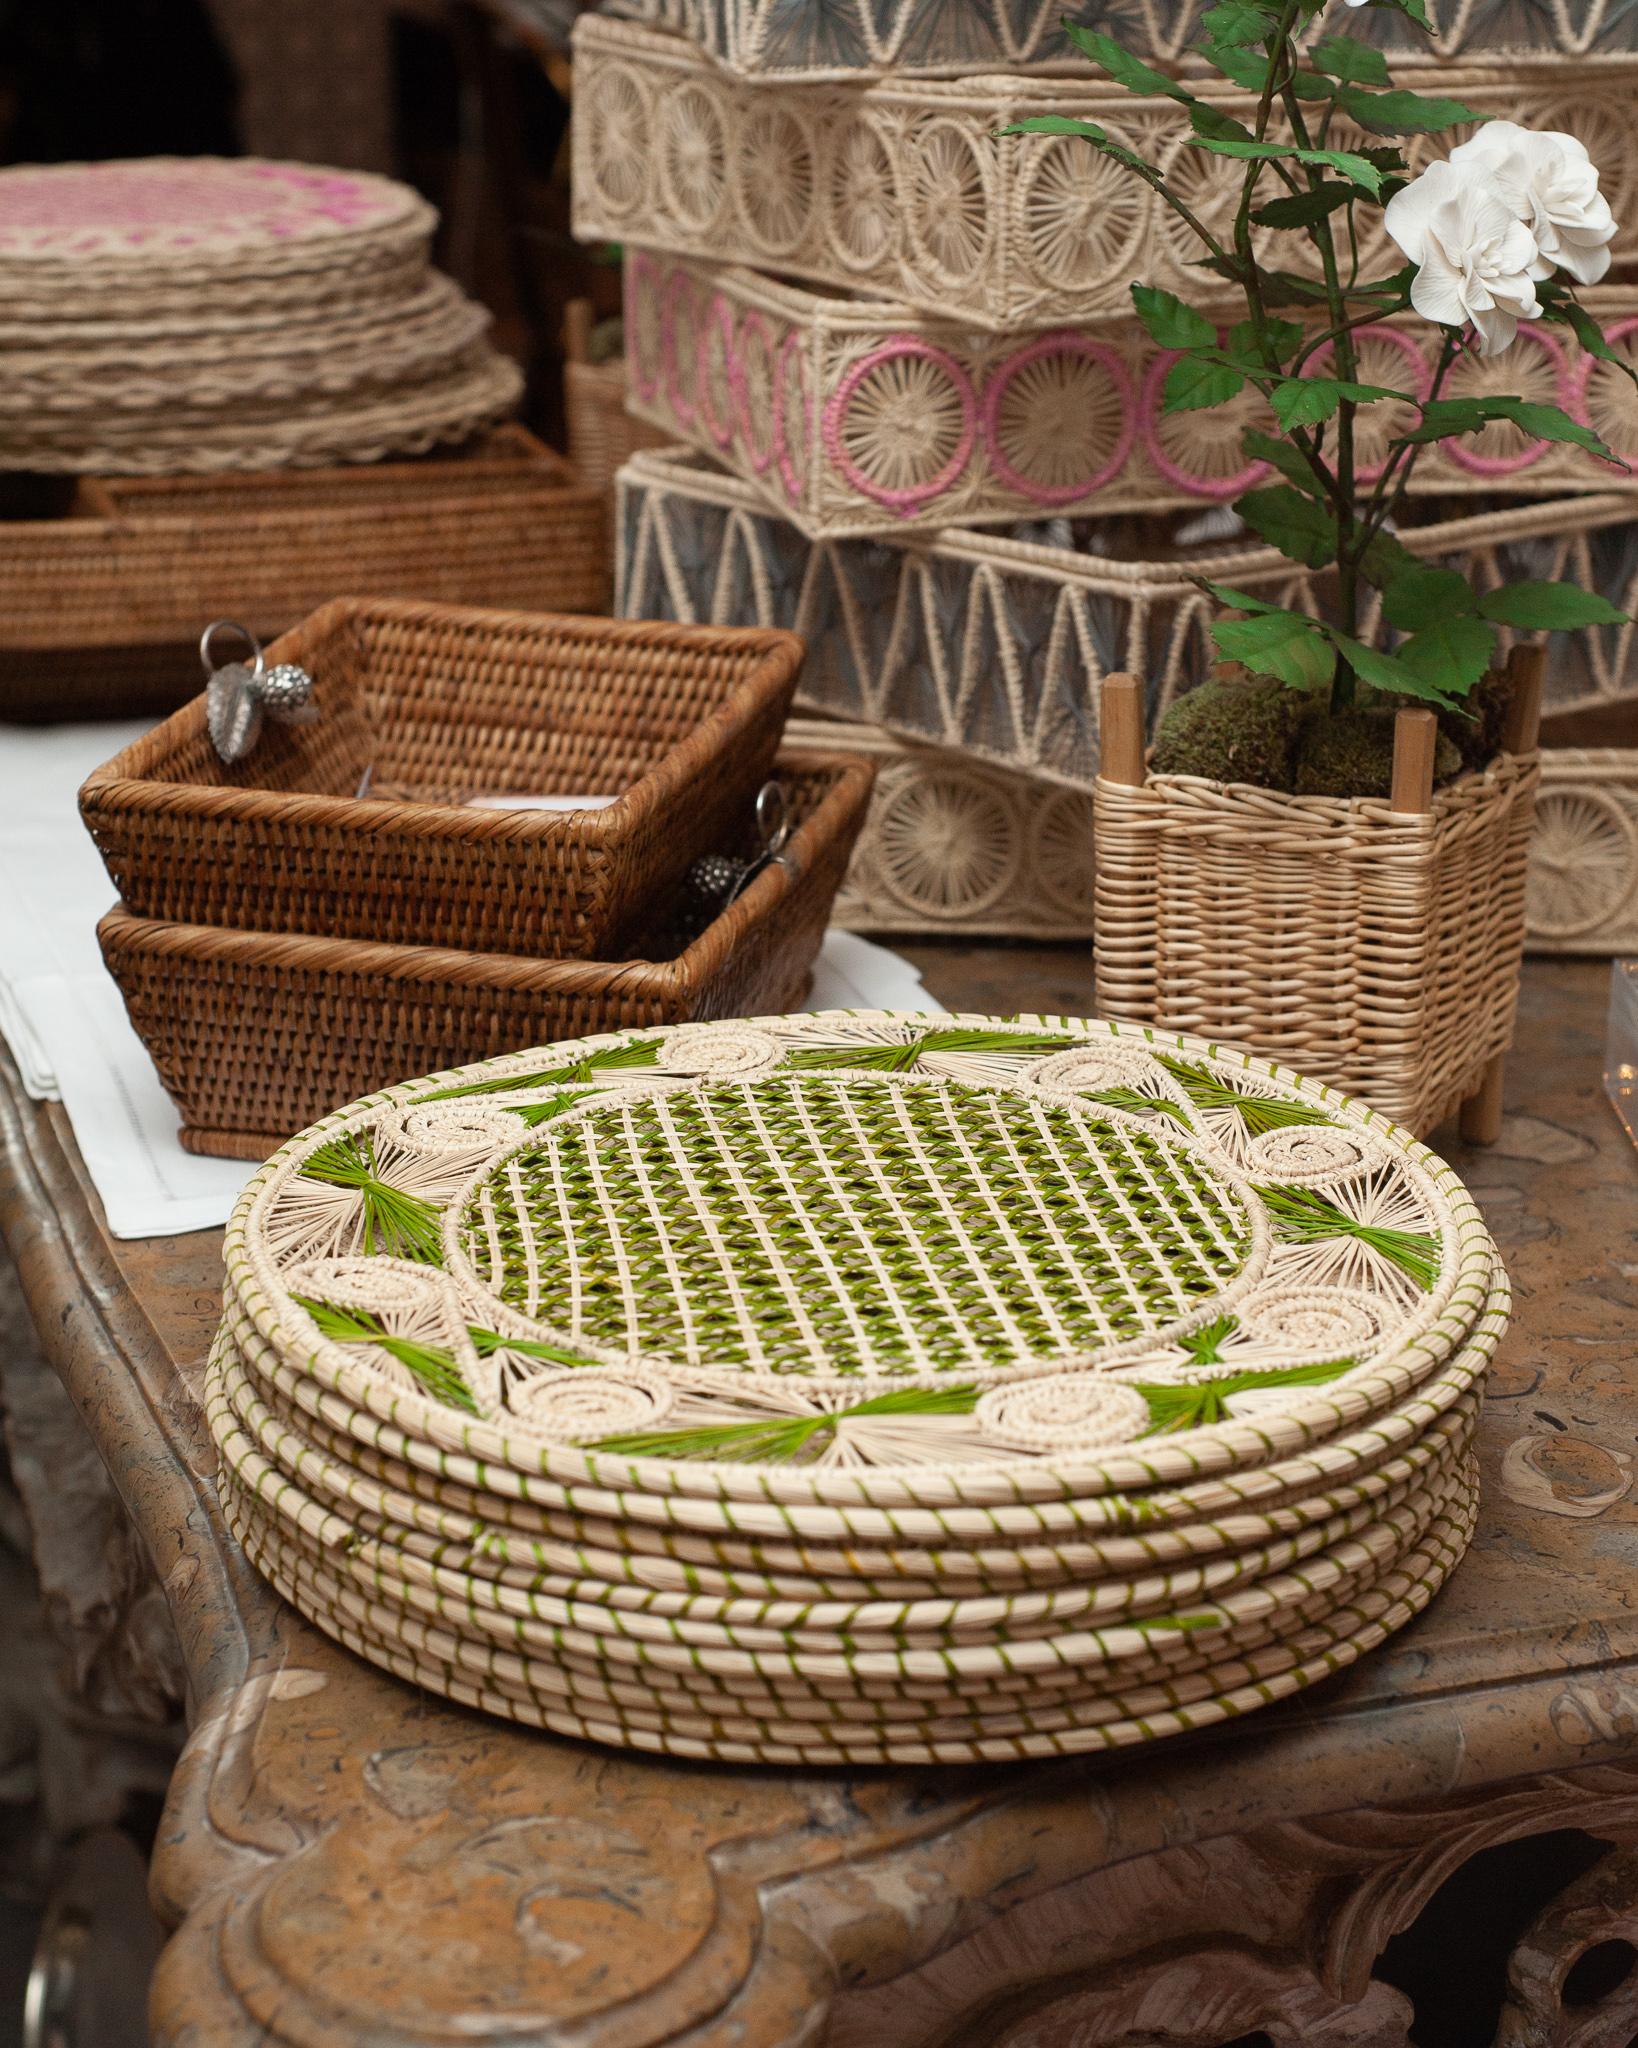 South American Contemporary Set of 6 Handwoven Natural and Green Rattan Placemats